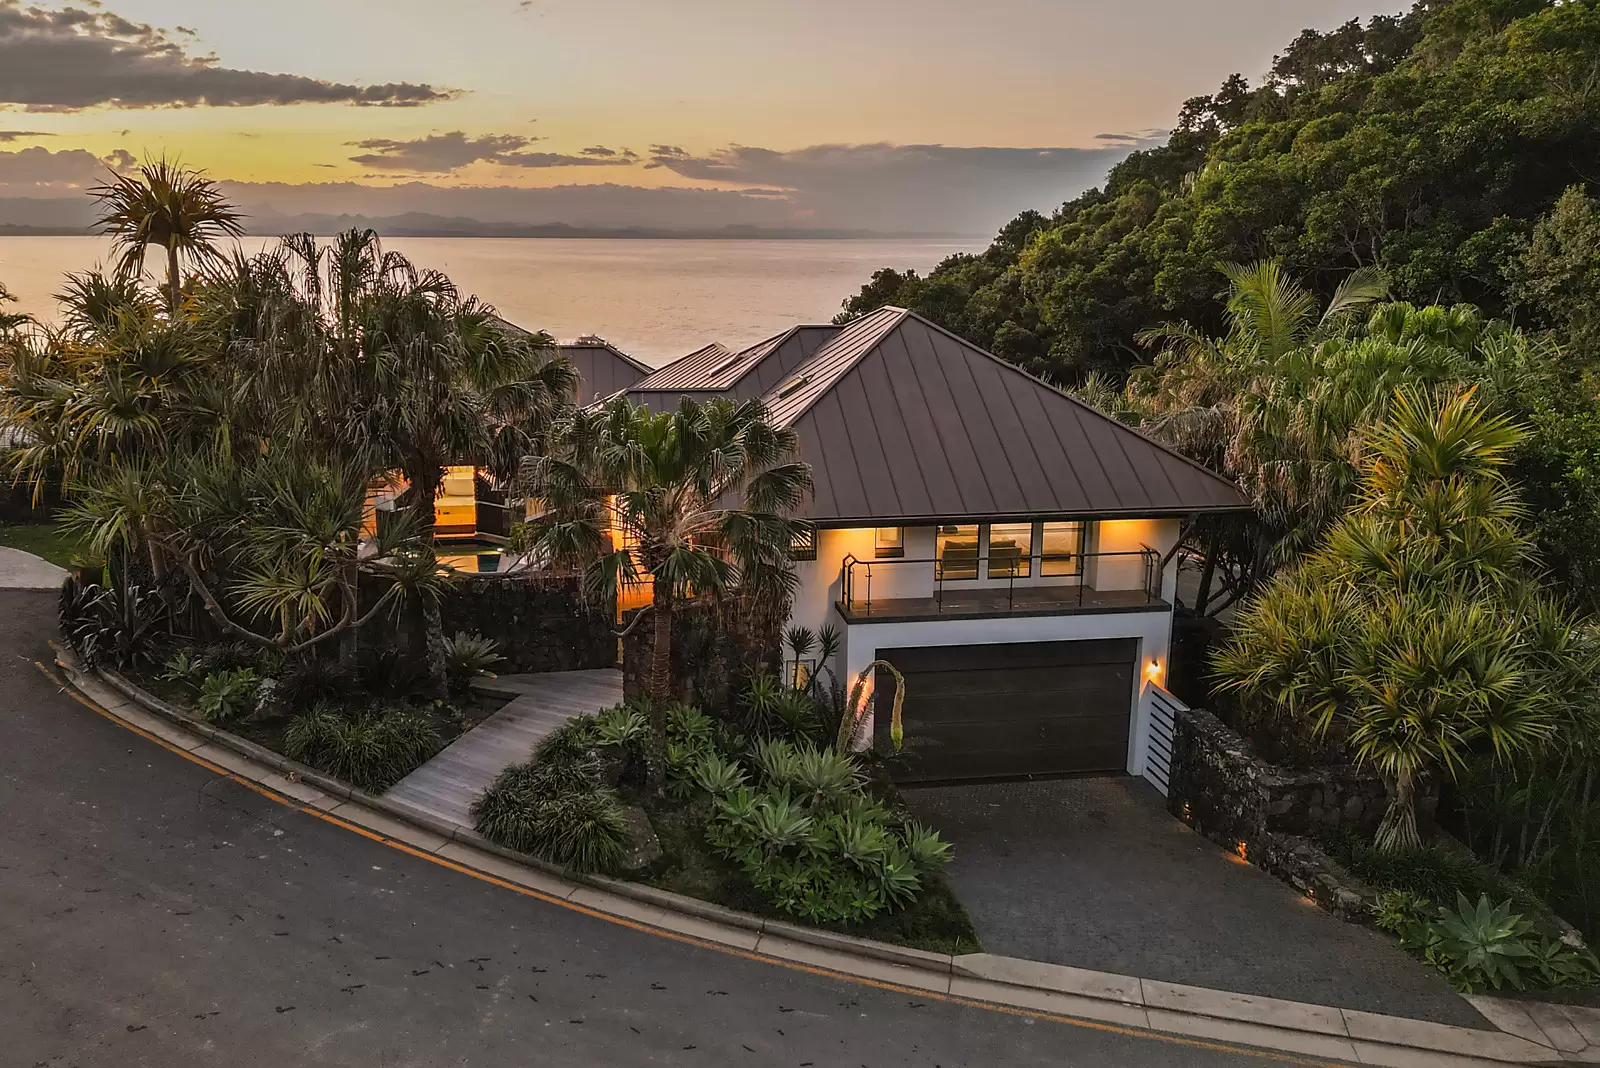 Photo #3: 41 Marine Parade, Byron Bay - For Sale by Sydney Sotheby's International Realty